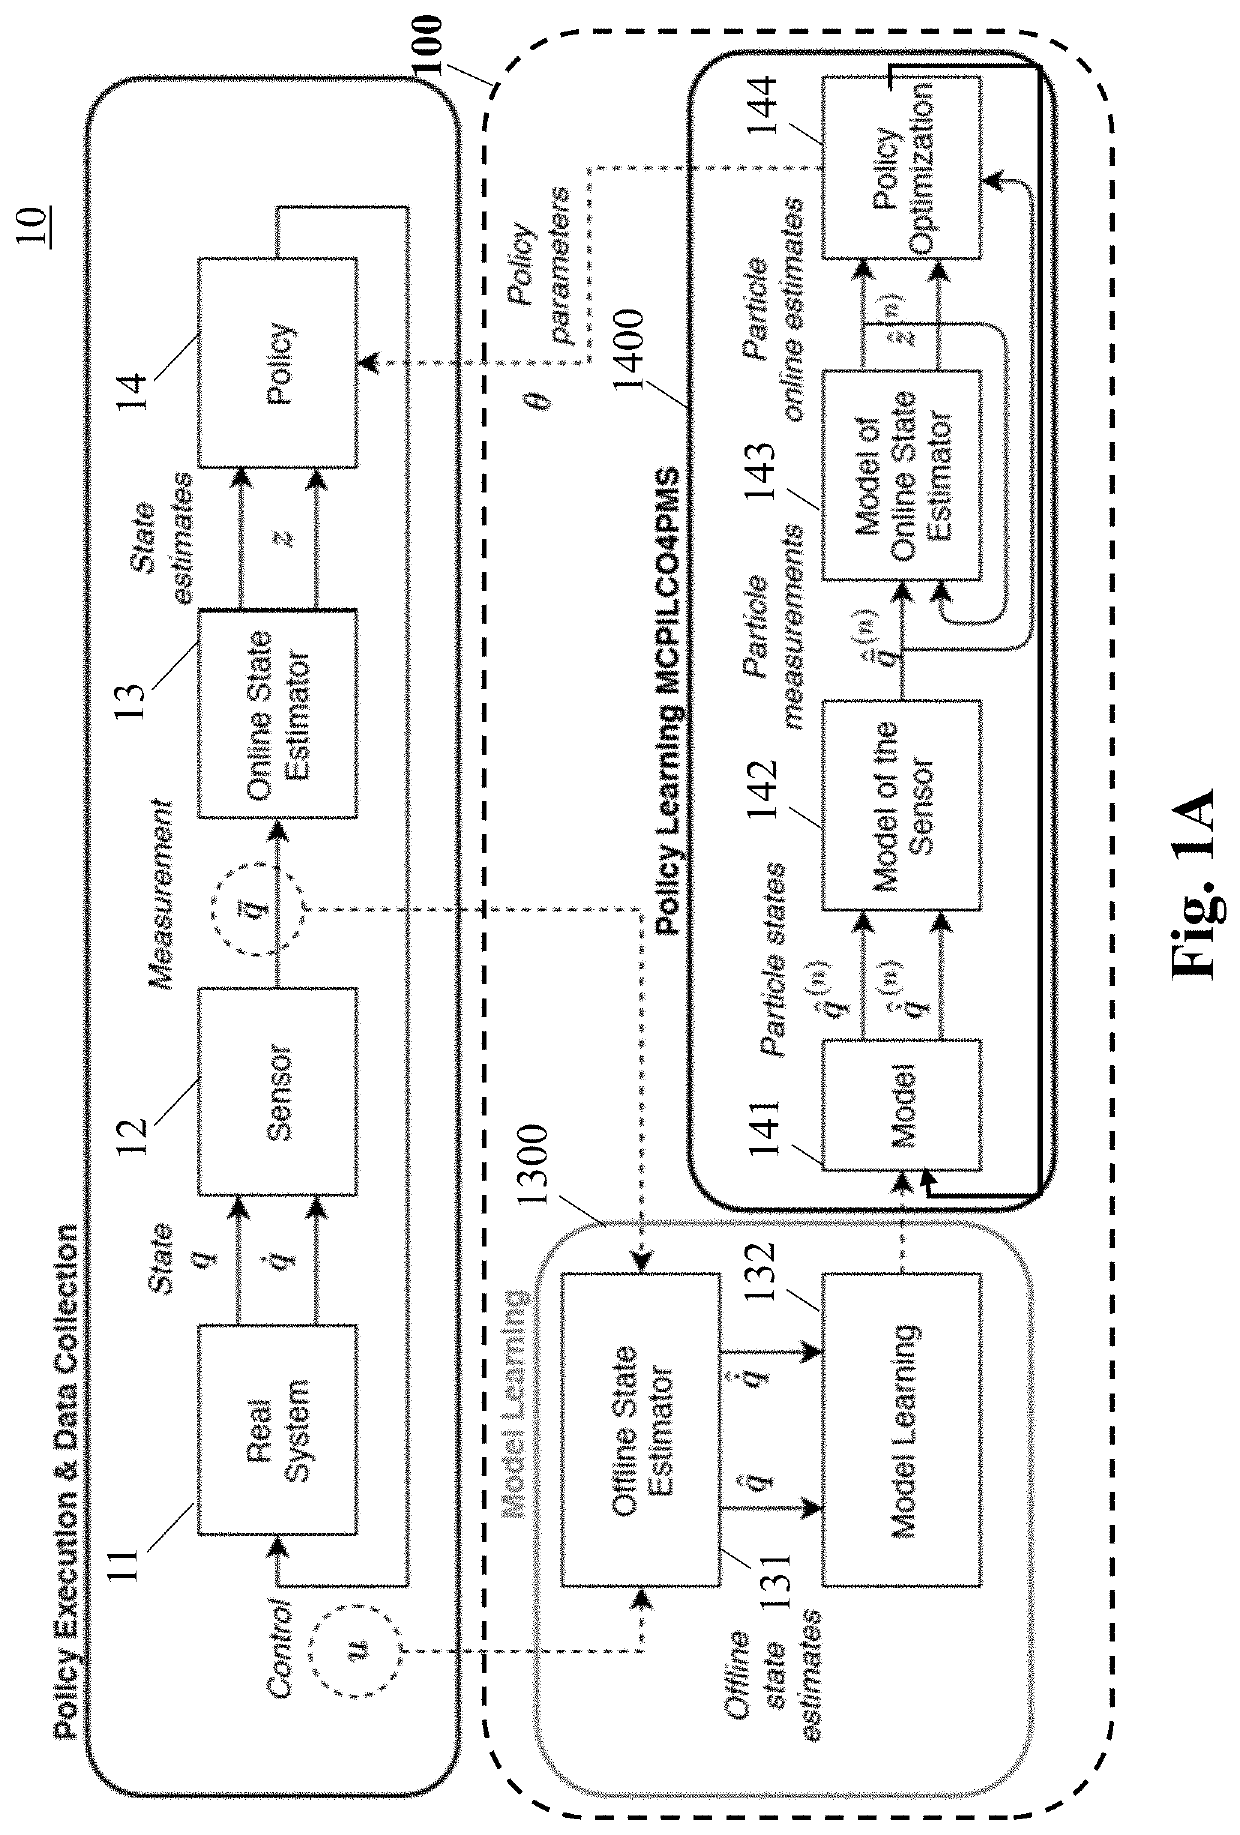 Method and System for Modelling and Control Partially Measurable Systems